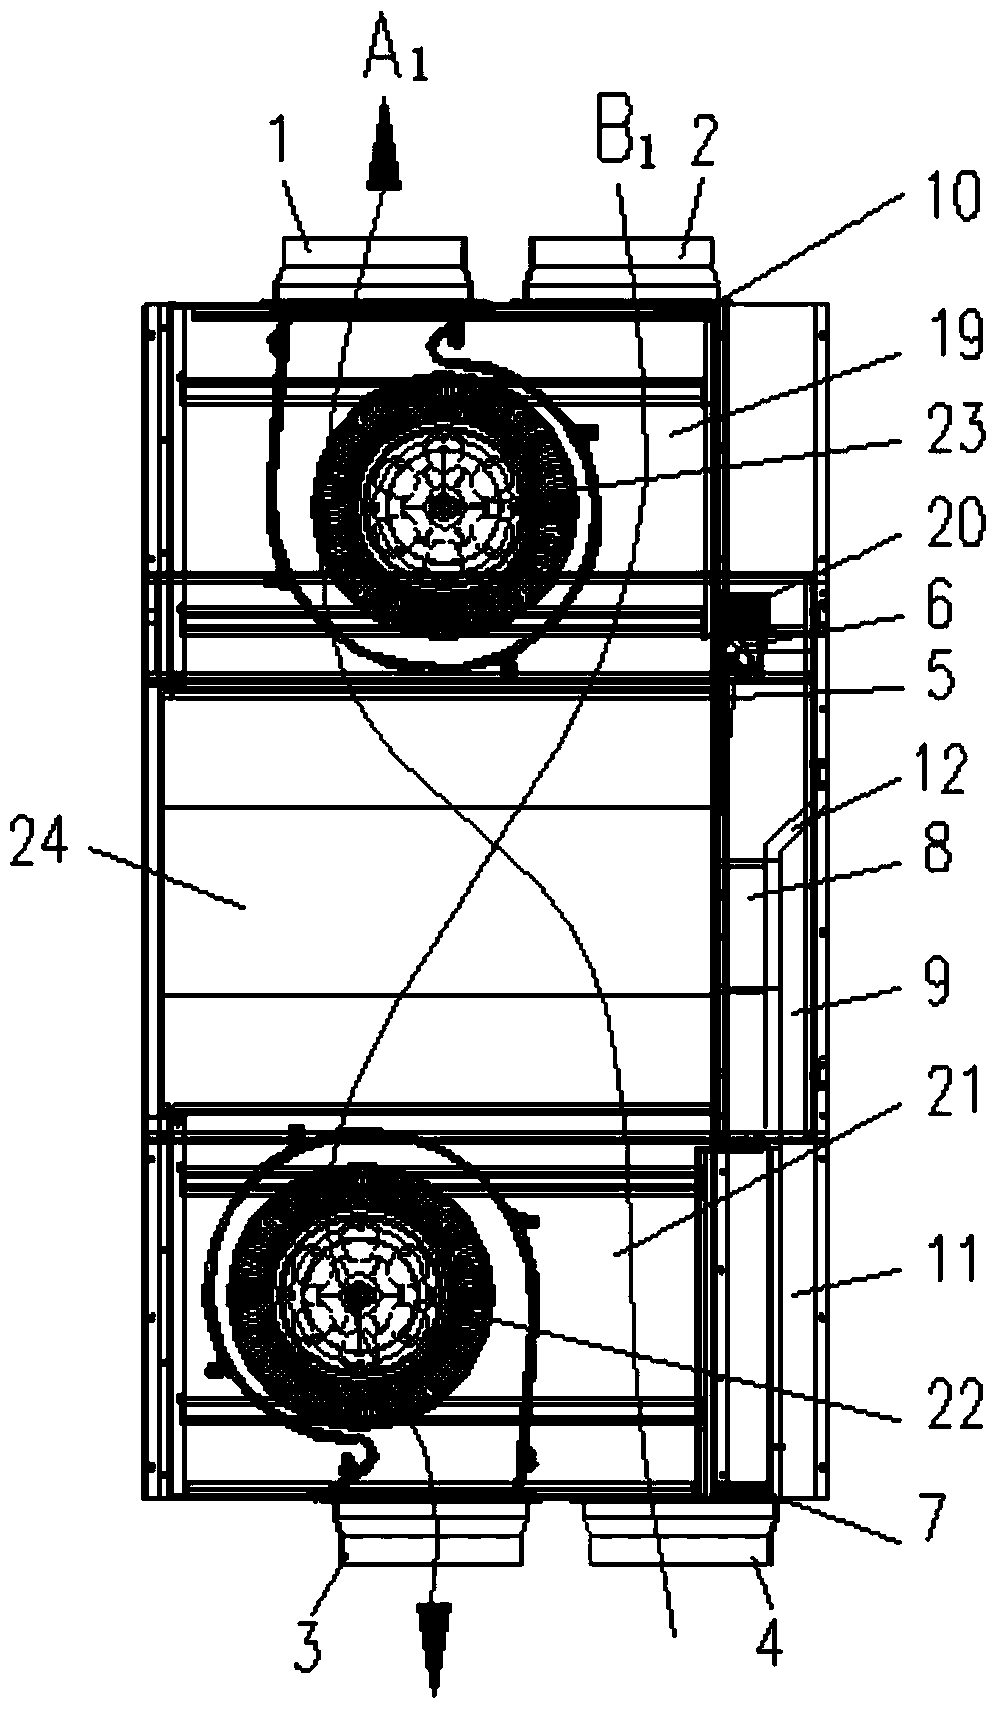 Bypass structure, ventilation equipment and ventilation method